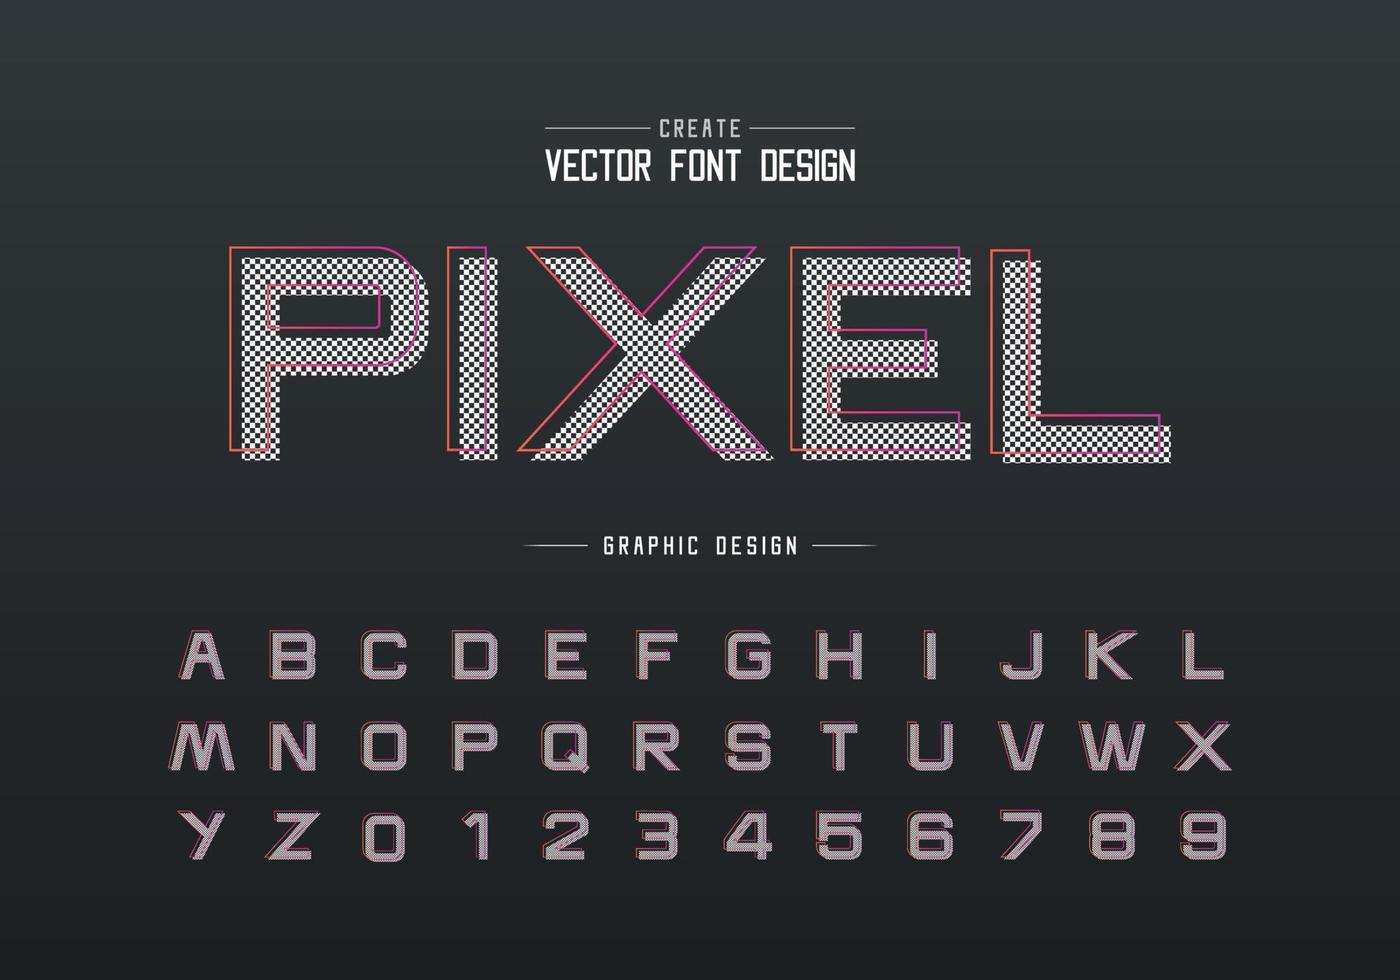 Pixel font and alphabet vector, Design typeface letter and number, Graphic text on background vector